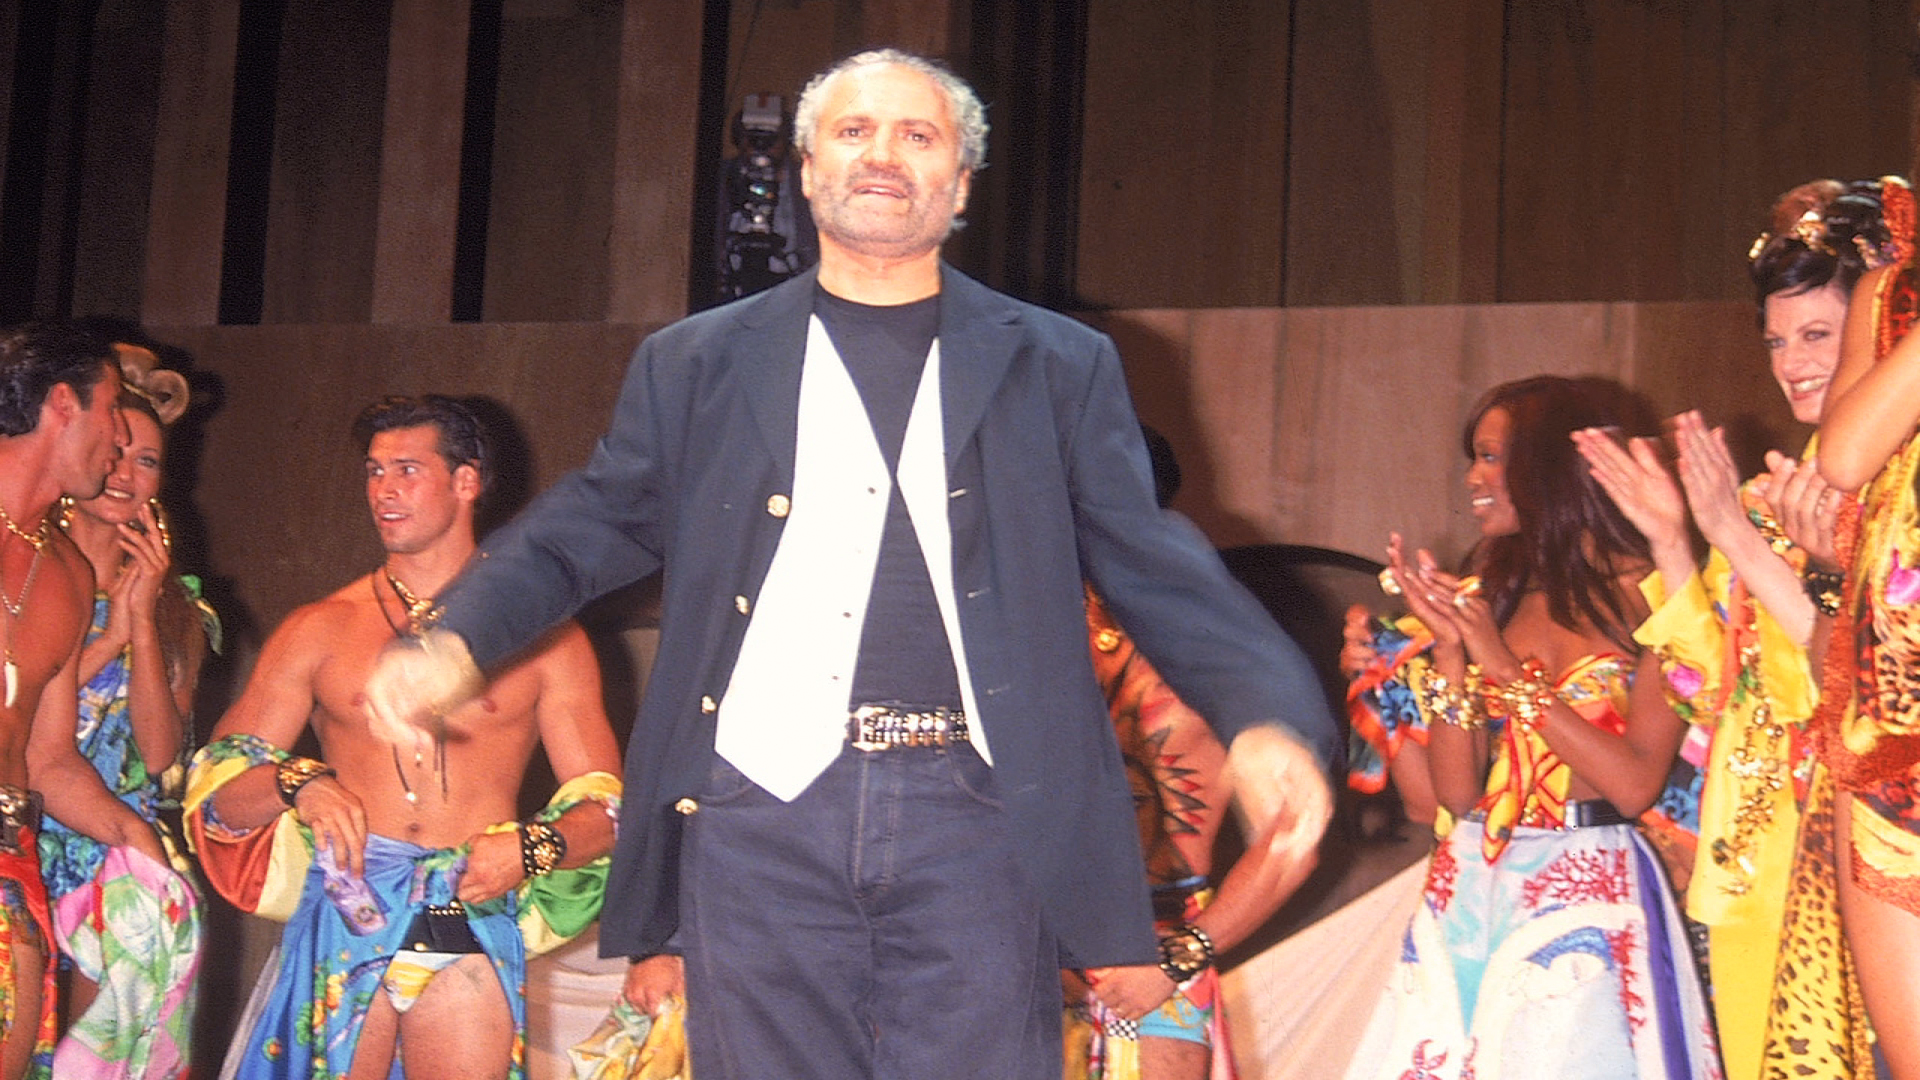 gianni versace was one of the most successful fashion designers in the 1980s and 1990s